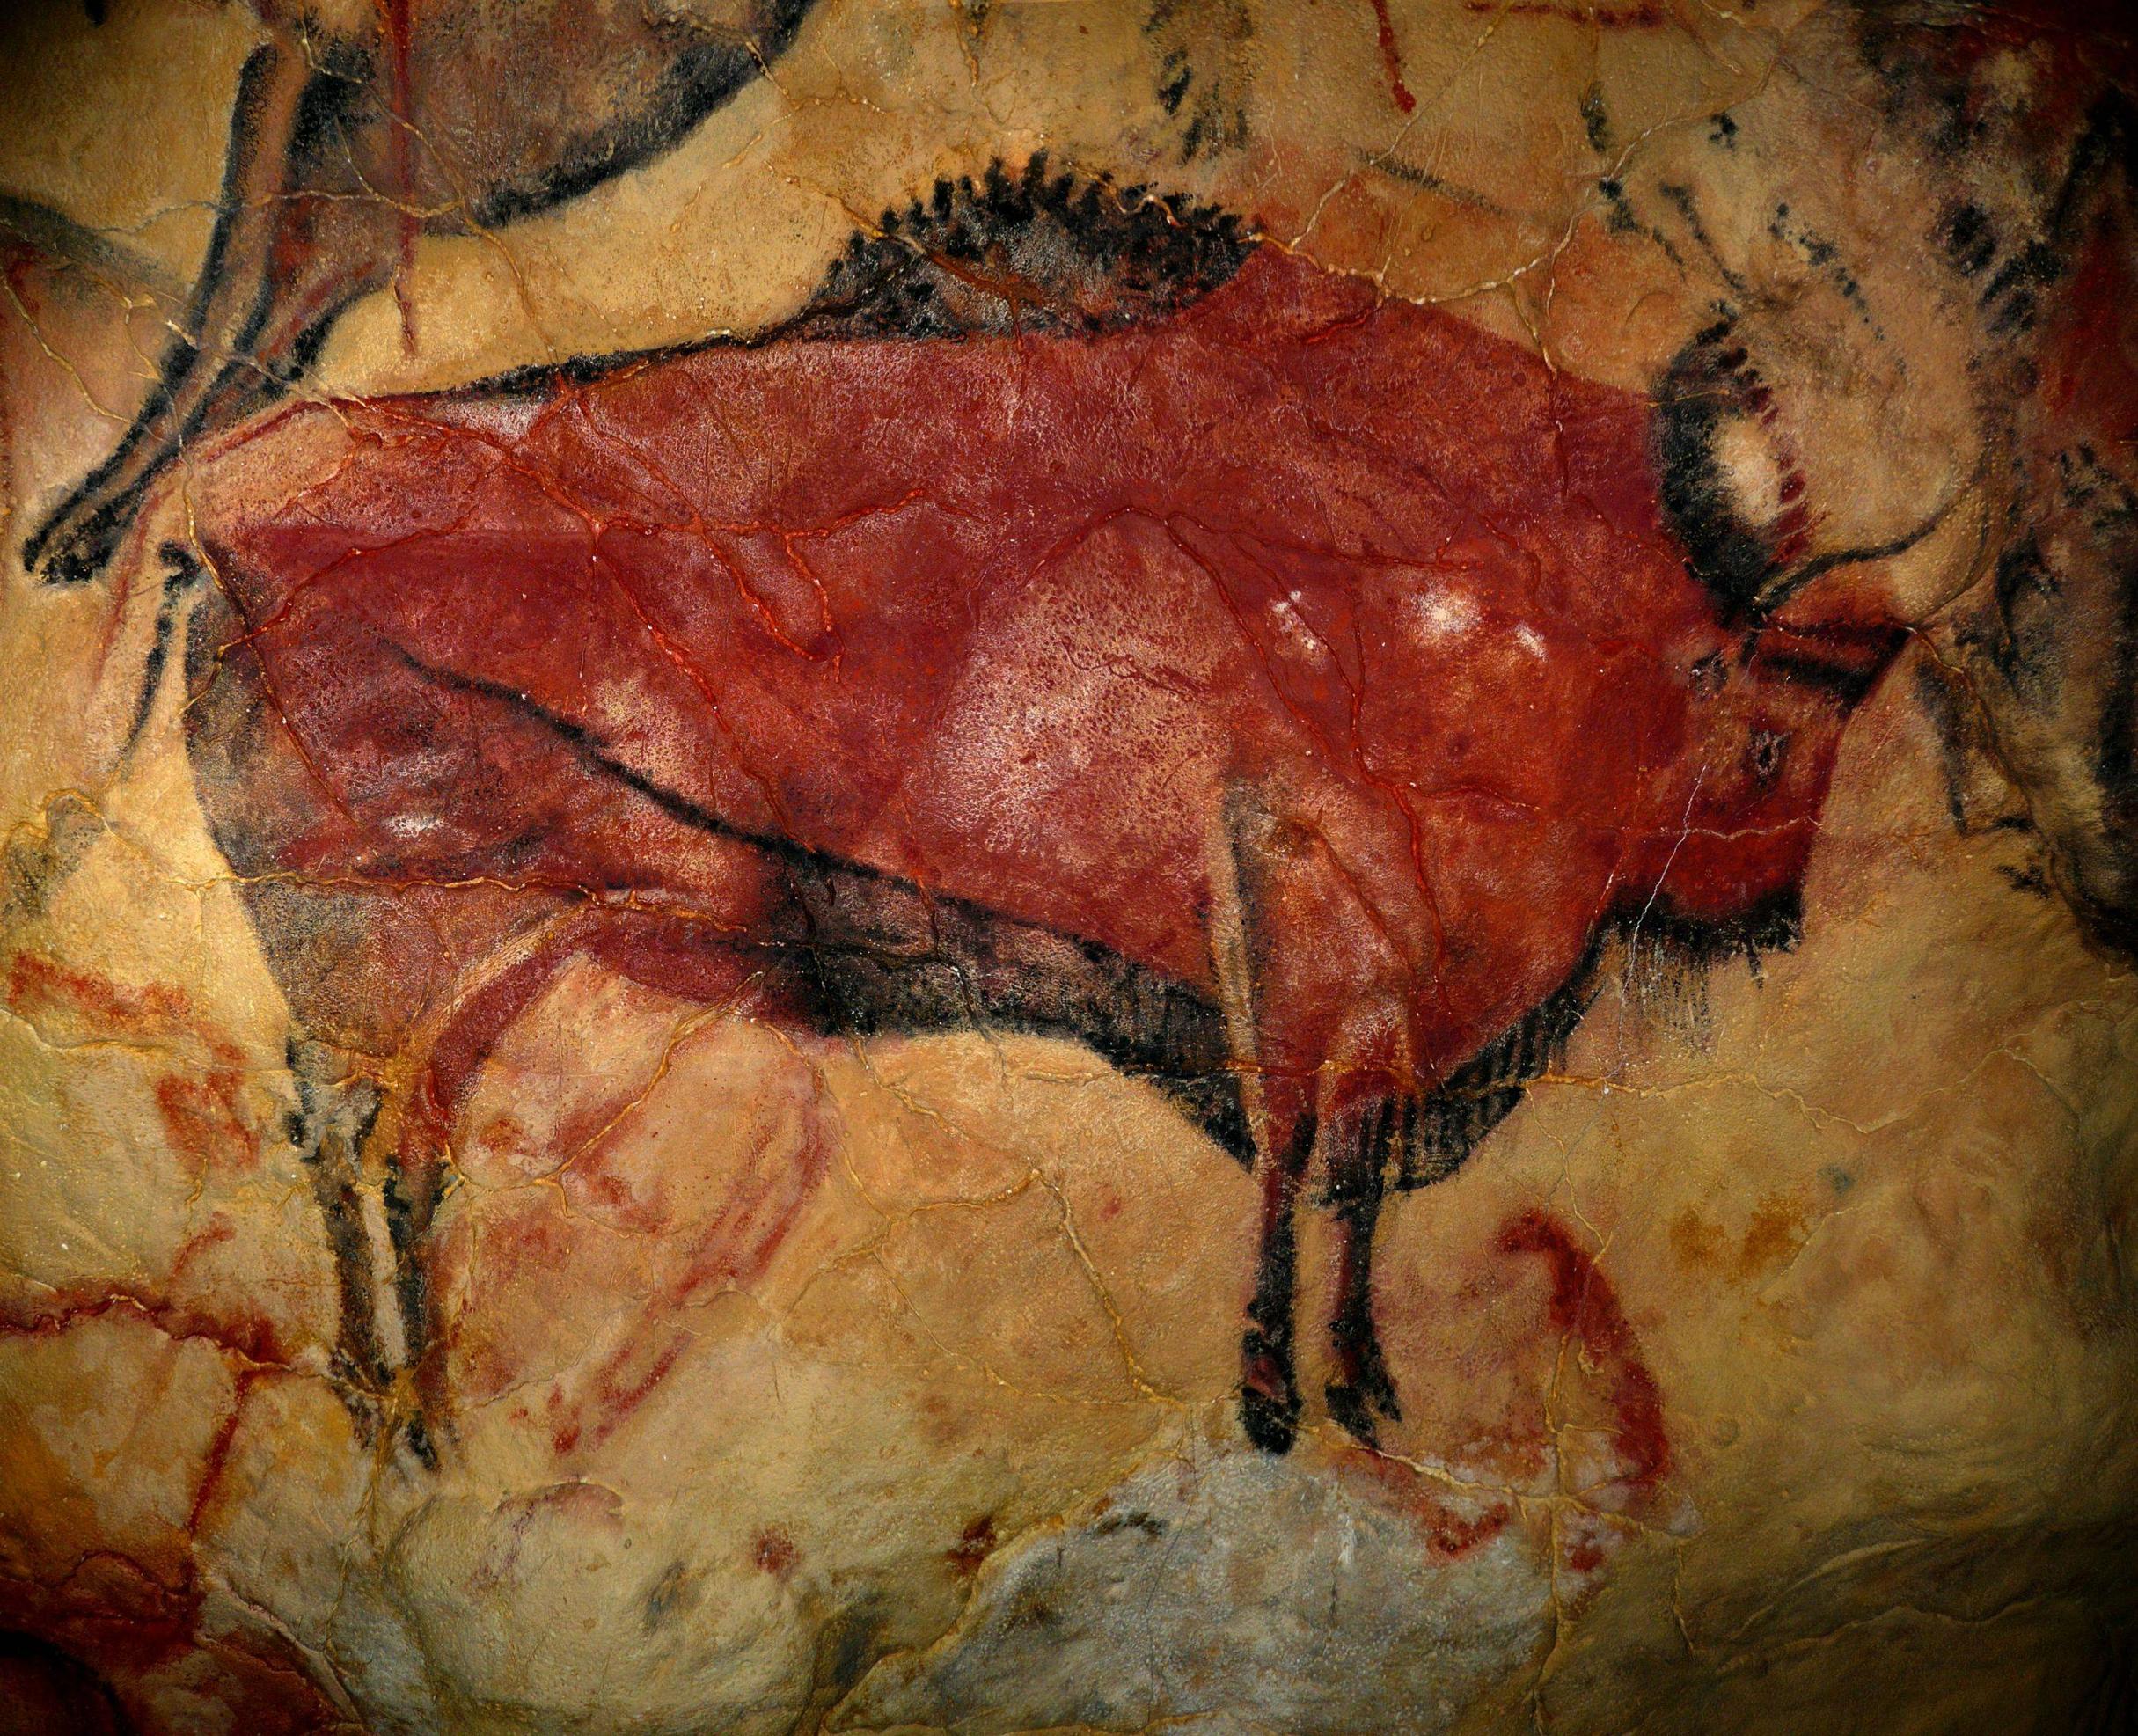 Painting of a bison in the cave of Altamira, which was created from 35,600 to 13,500 BCE by Cro-Magnon